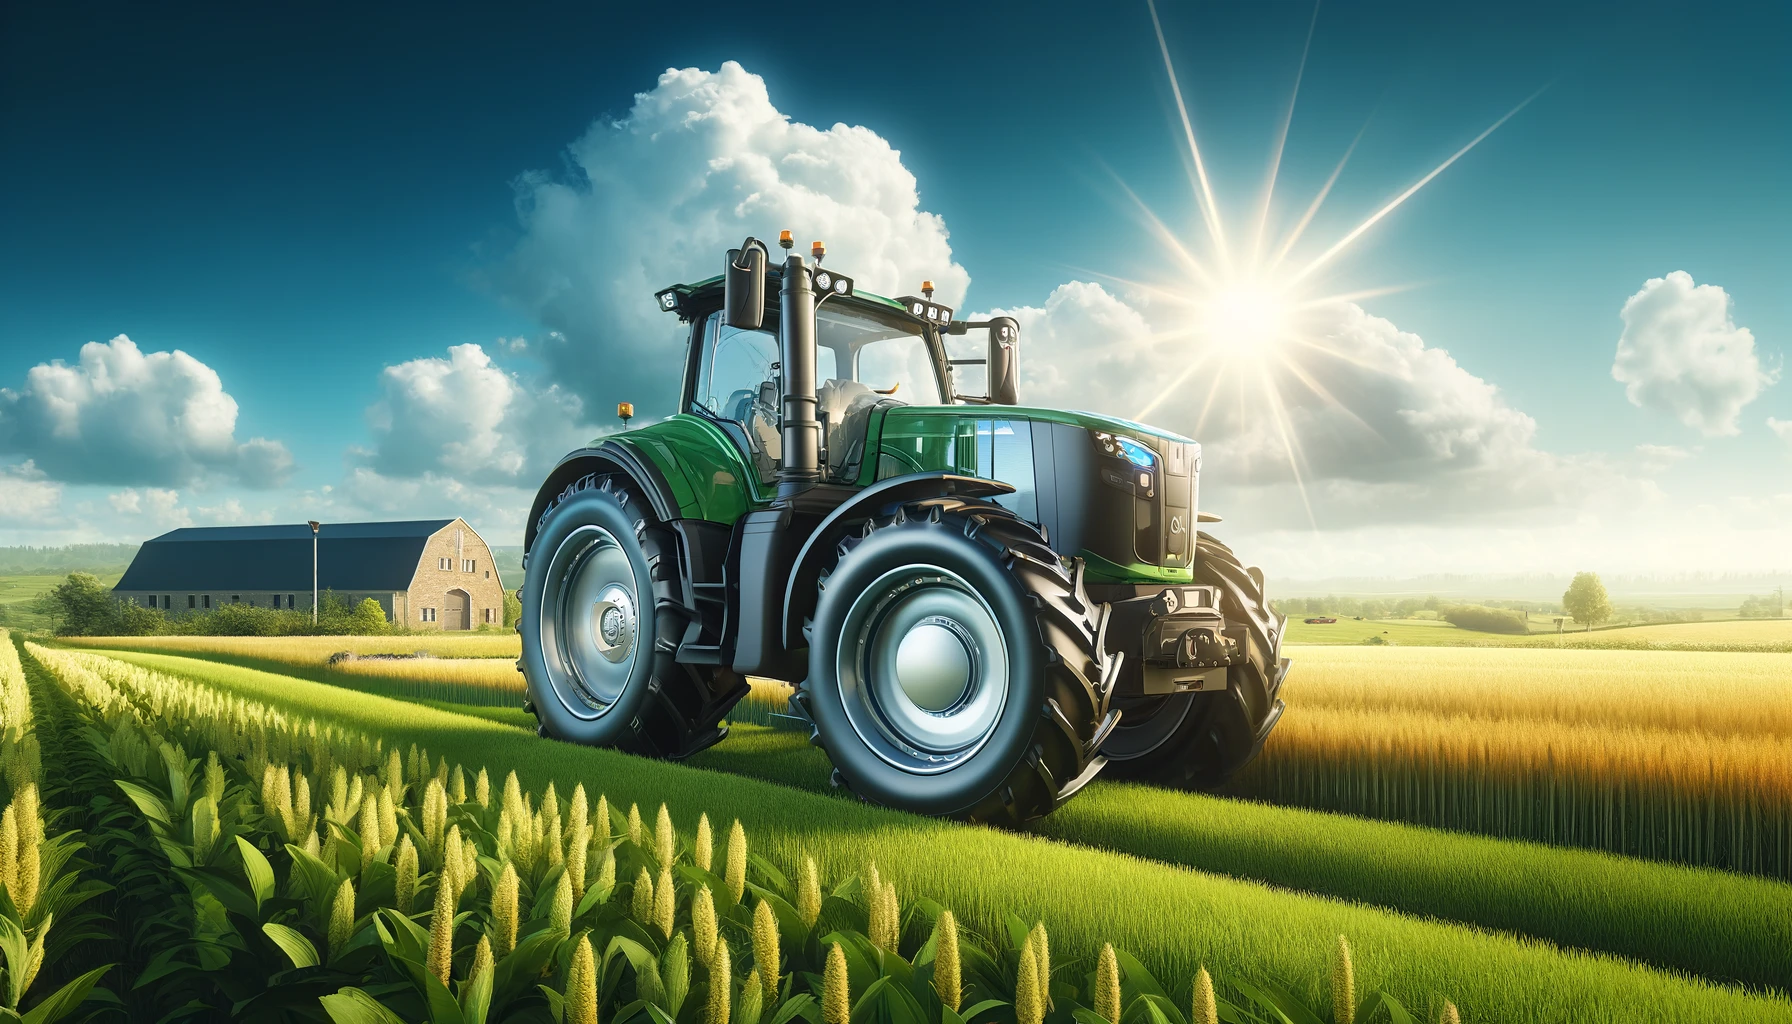 A modern, sleek tractor in a scenic agricultural field